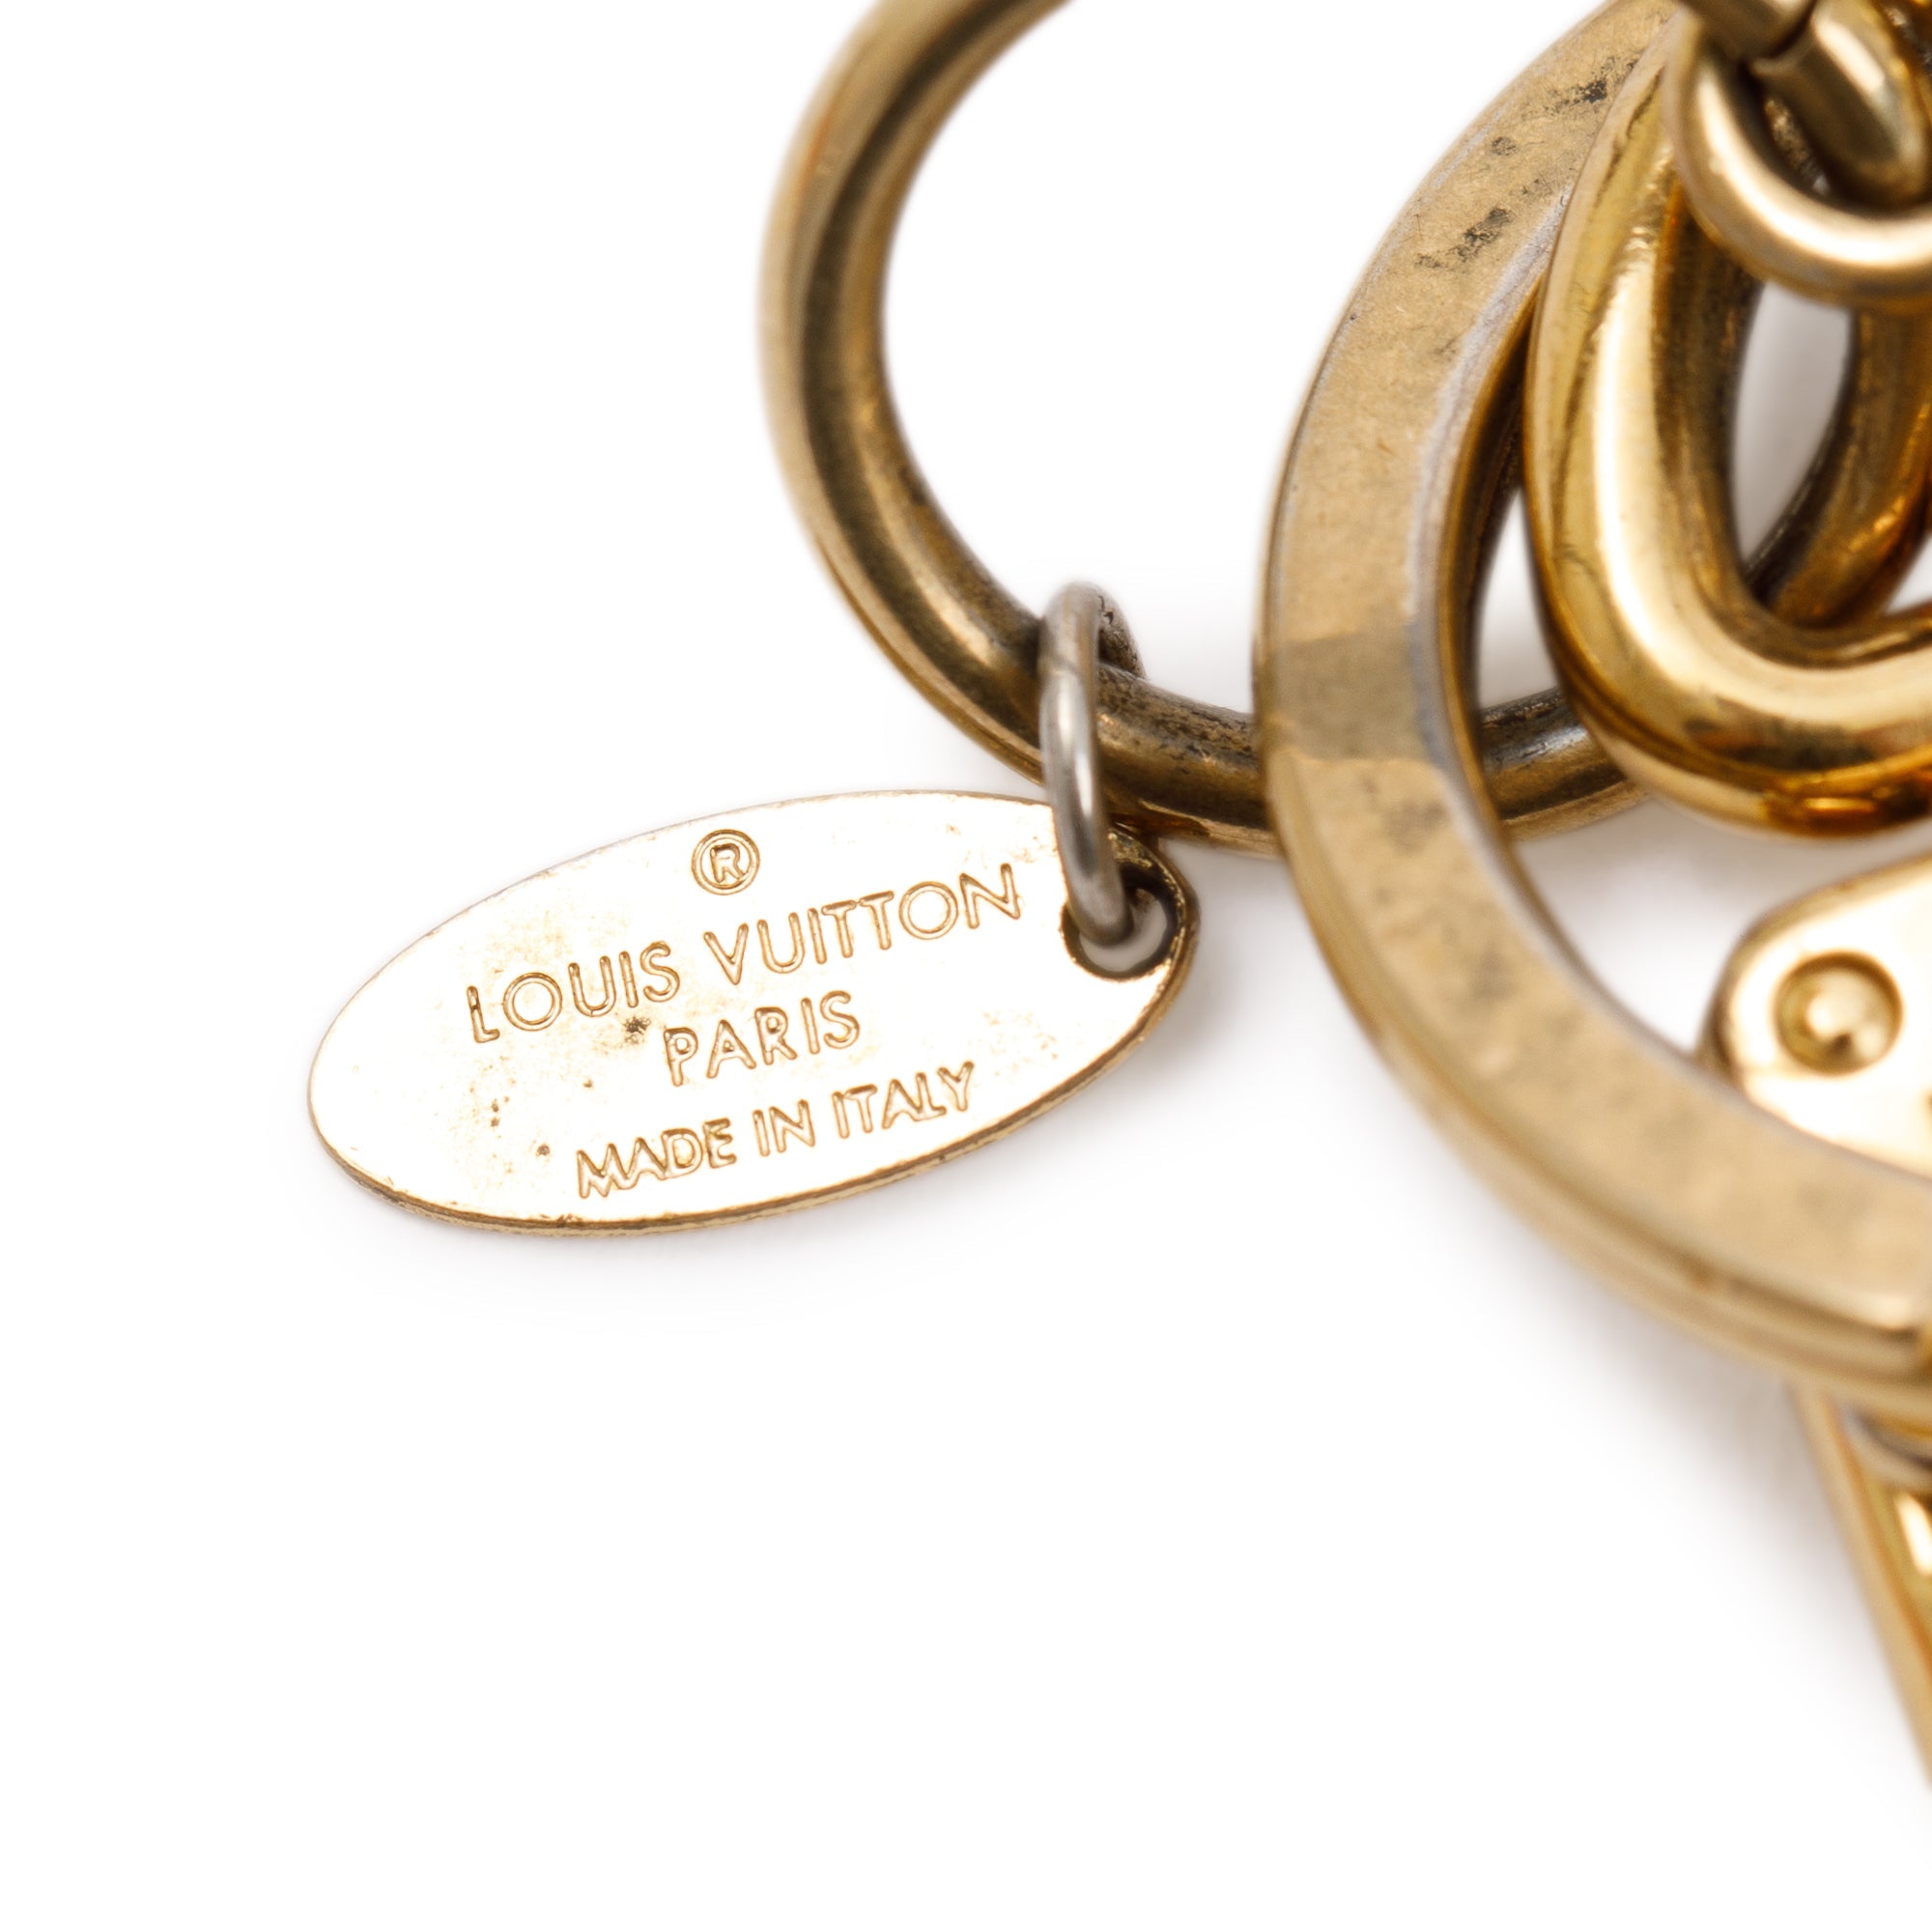 Opinions on this bag charm for this bag? : r/Louisvuitton